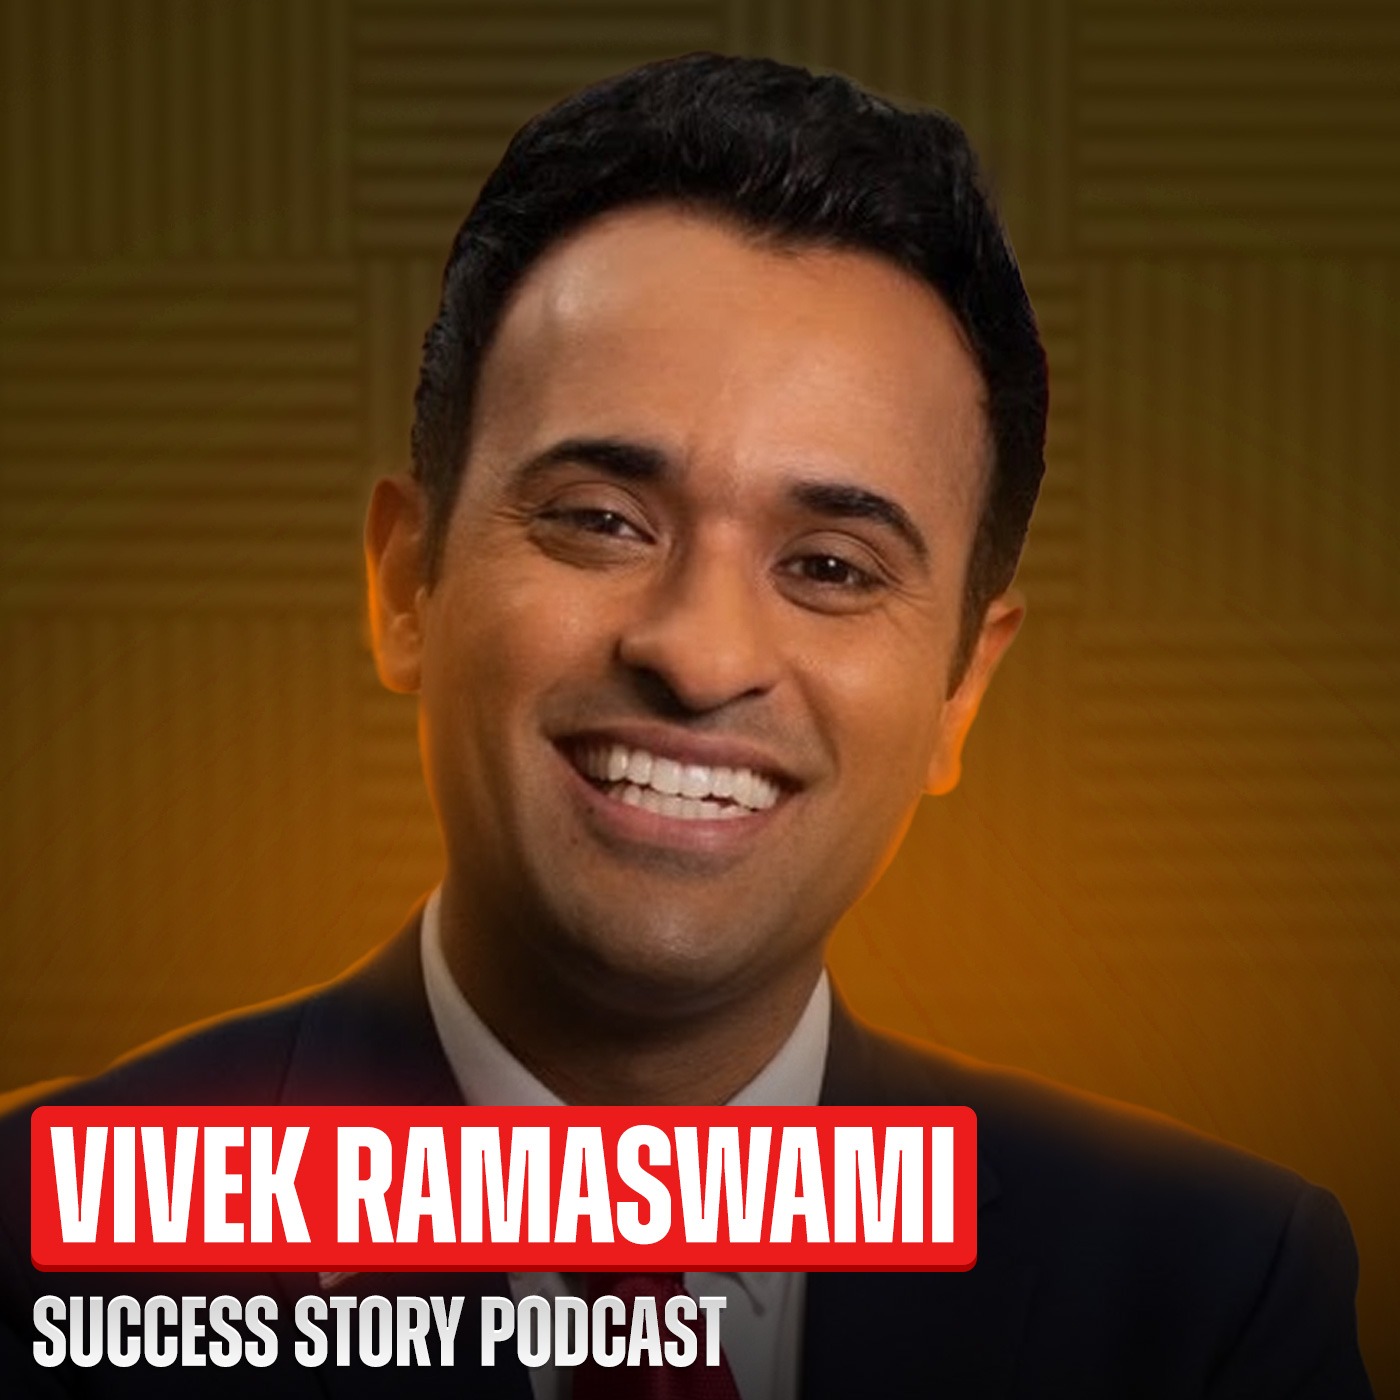 Lessons - Improving Corporate Conduct | Vivek Ramaswamy - Presidential Candidate, Entrepreneur and Author